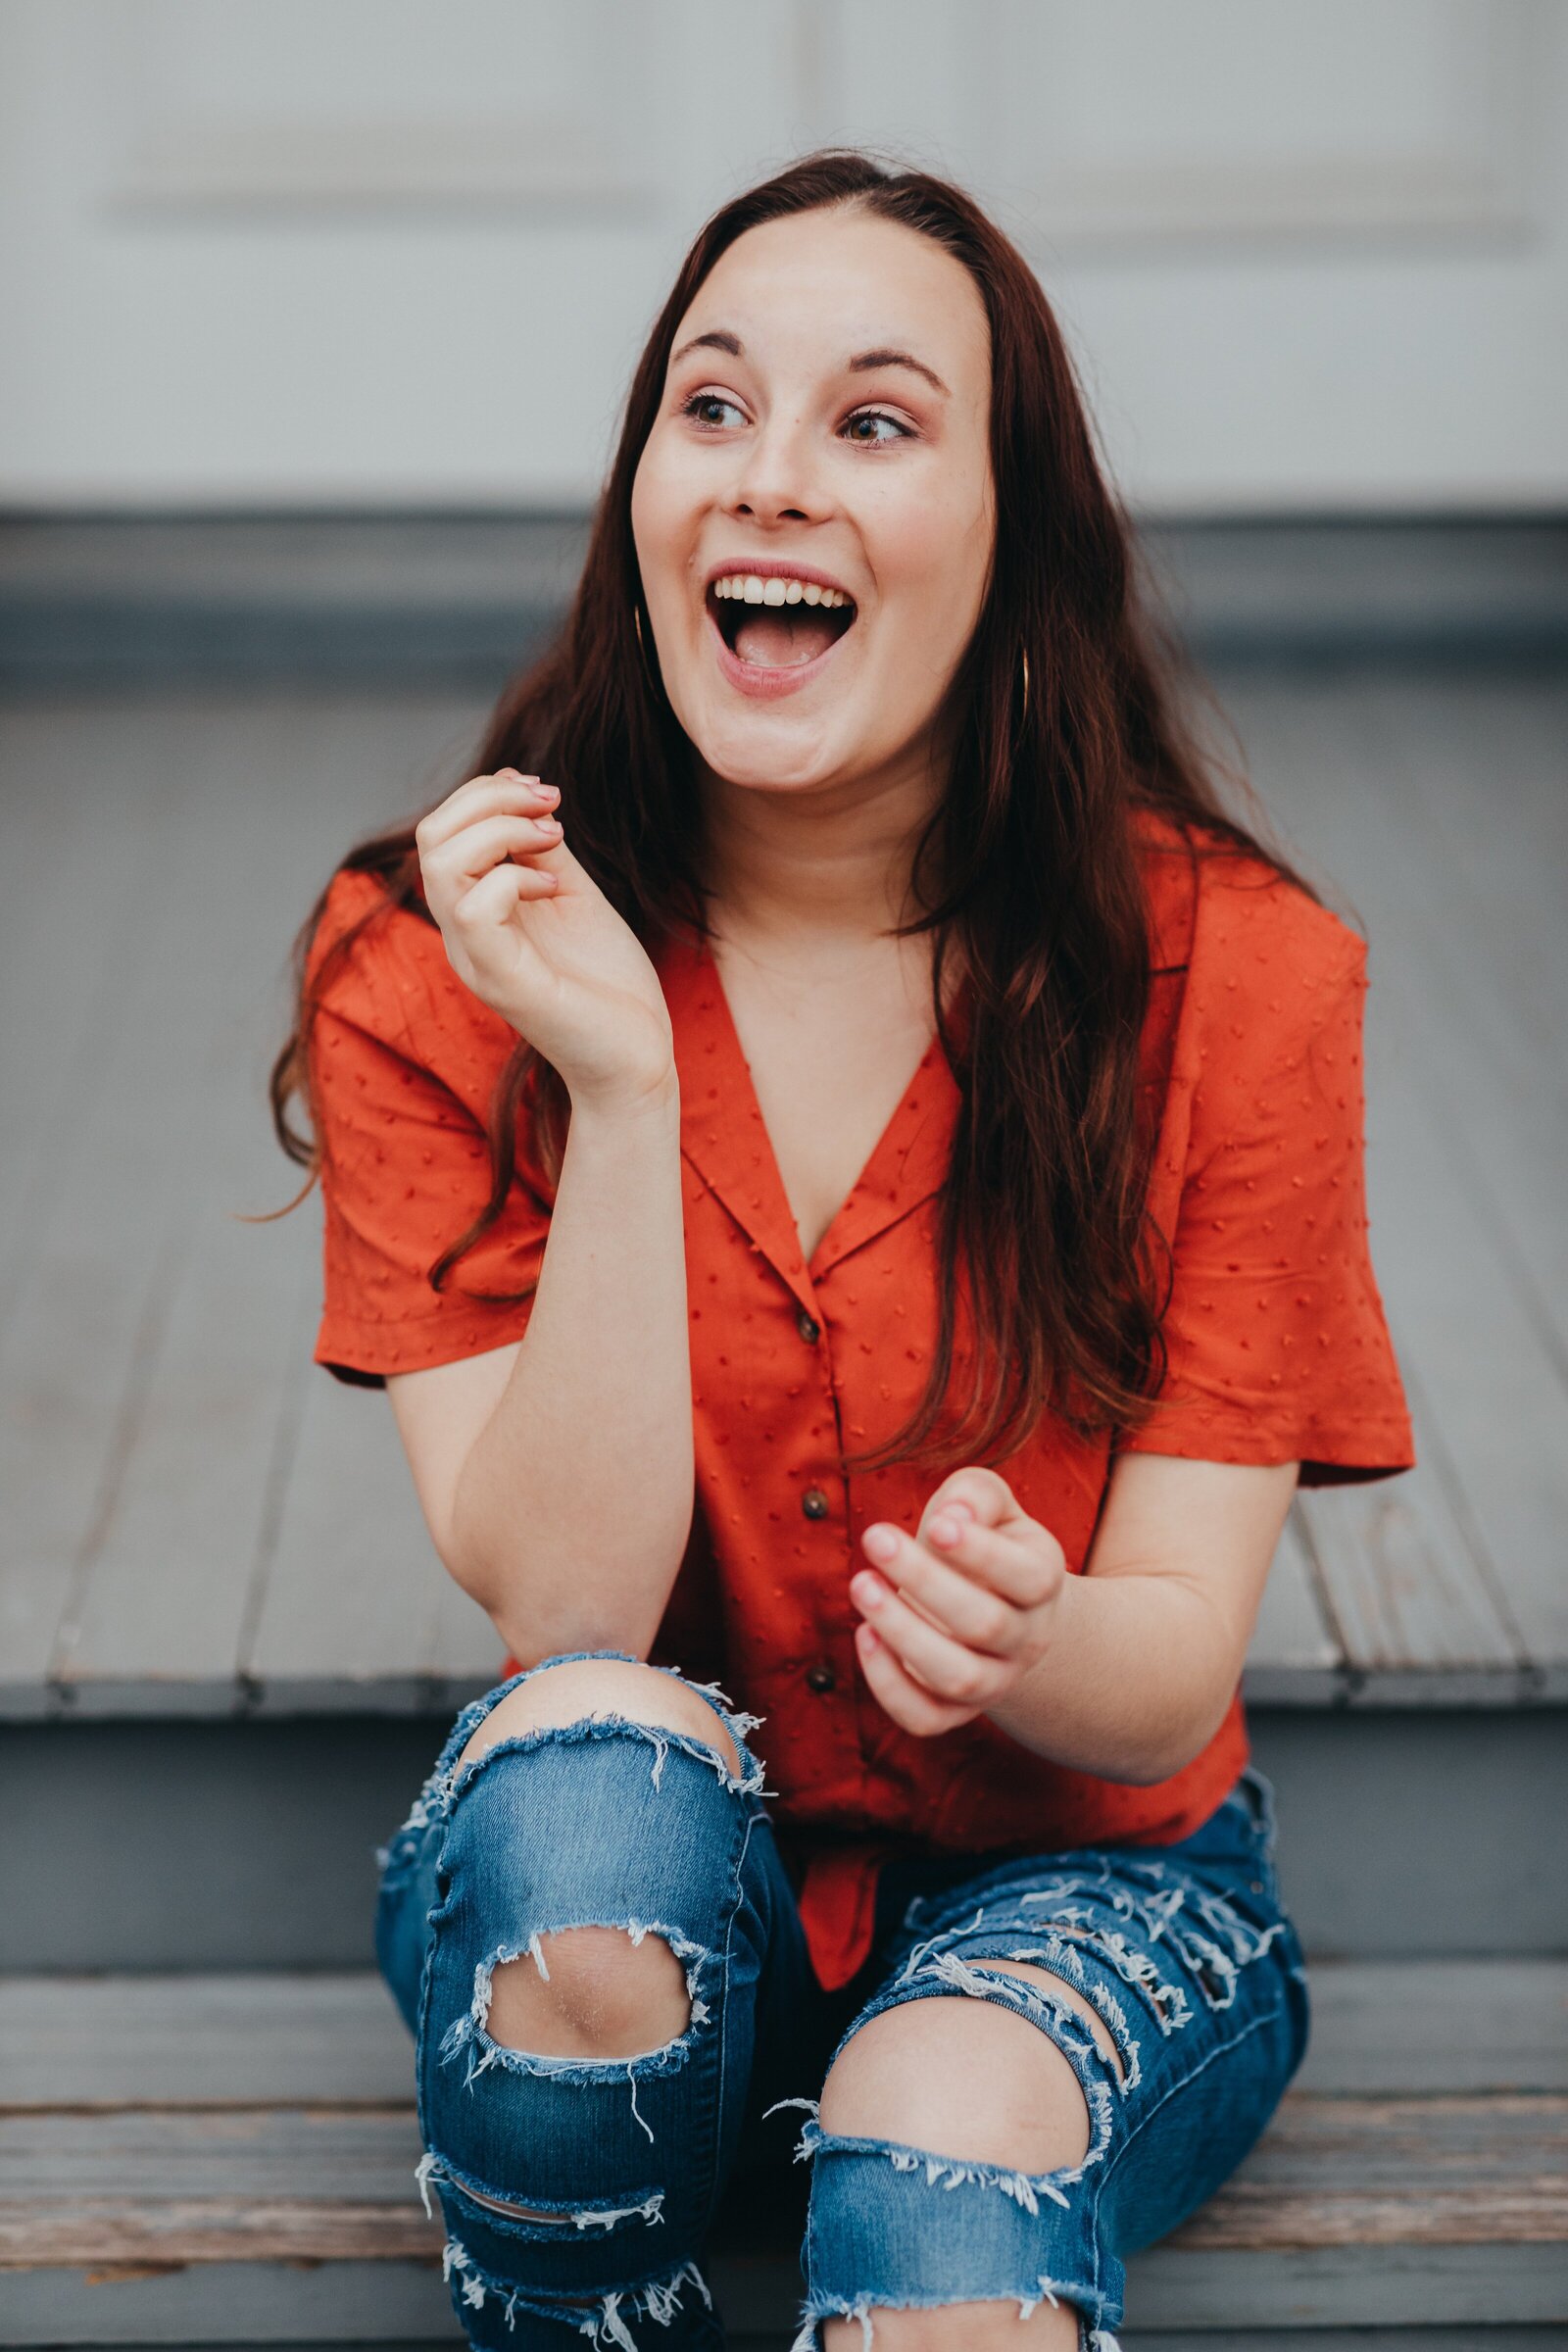 High school senior girl laughing during photo session